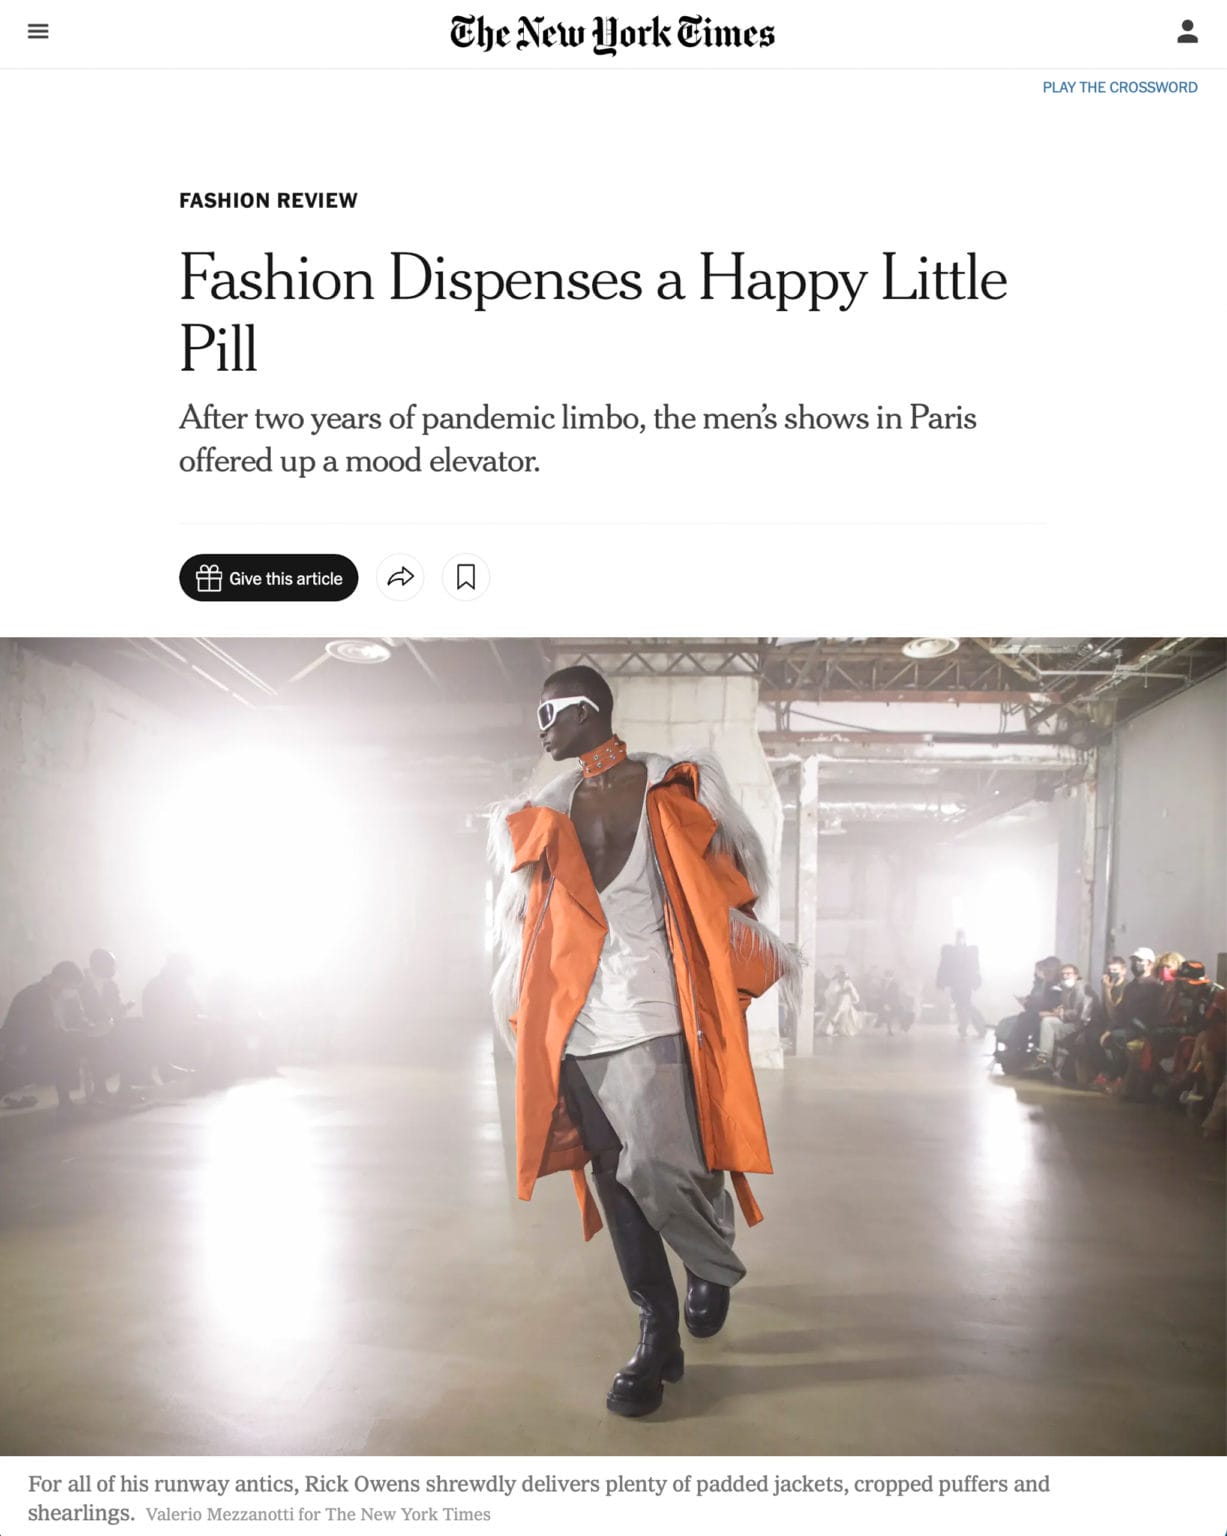 Fashion Dispenses a Happy Little Pill - The New York Times